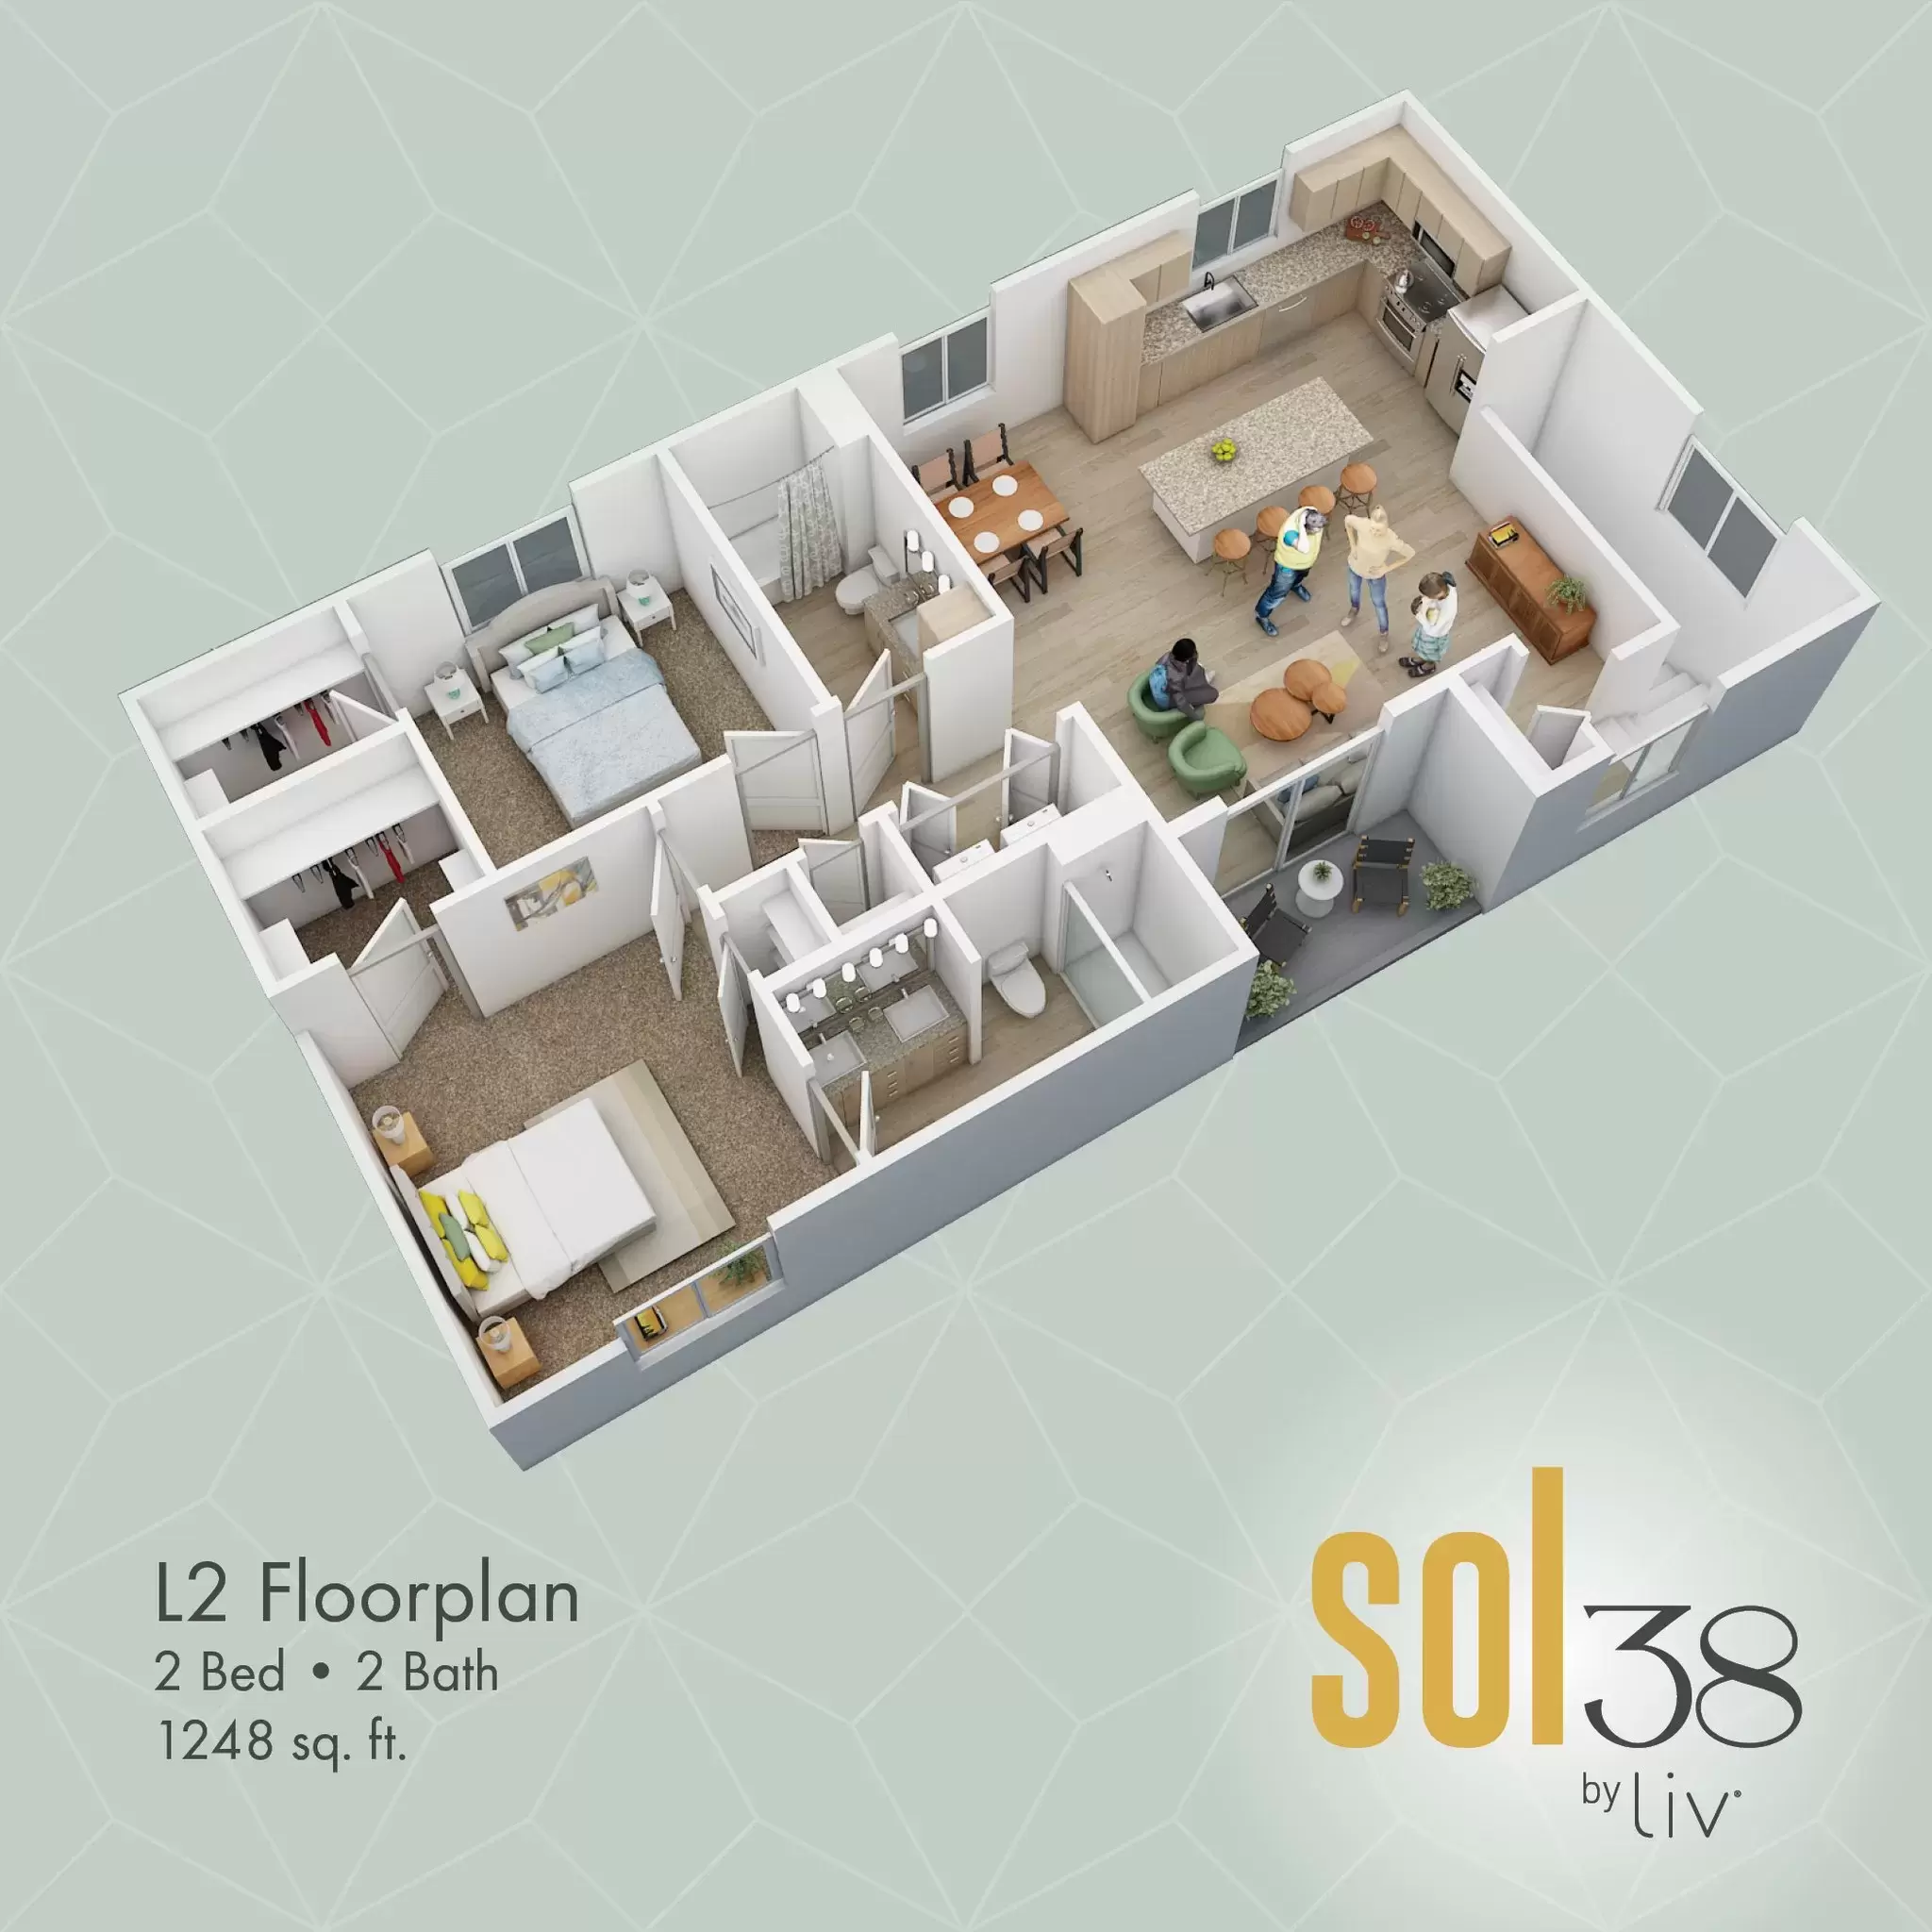 Your spacious oasis awaits! Say hello to L2. 👋

Find everything you're looking for in an apartment at Sol38 by Liv. Enjoy access to your own garage and private home entrance in Laveen's enviable neighborhood.

Visit our website for more information or to pre-lease your perfect home! ➡ www.sol38byliv.com